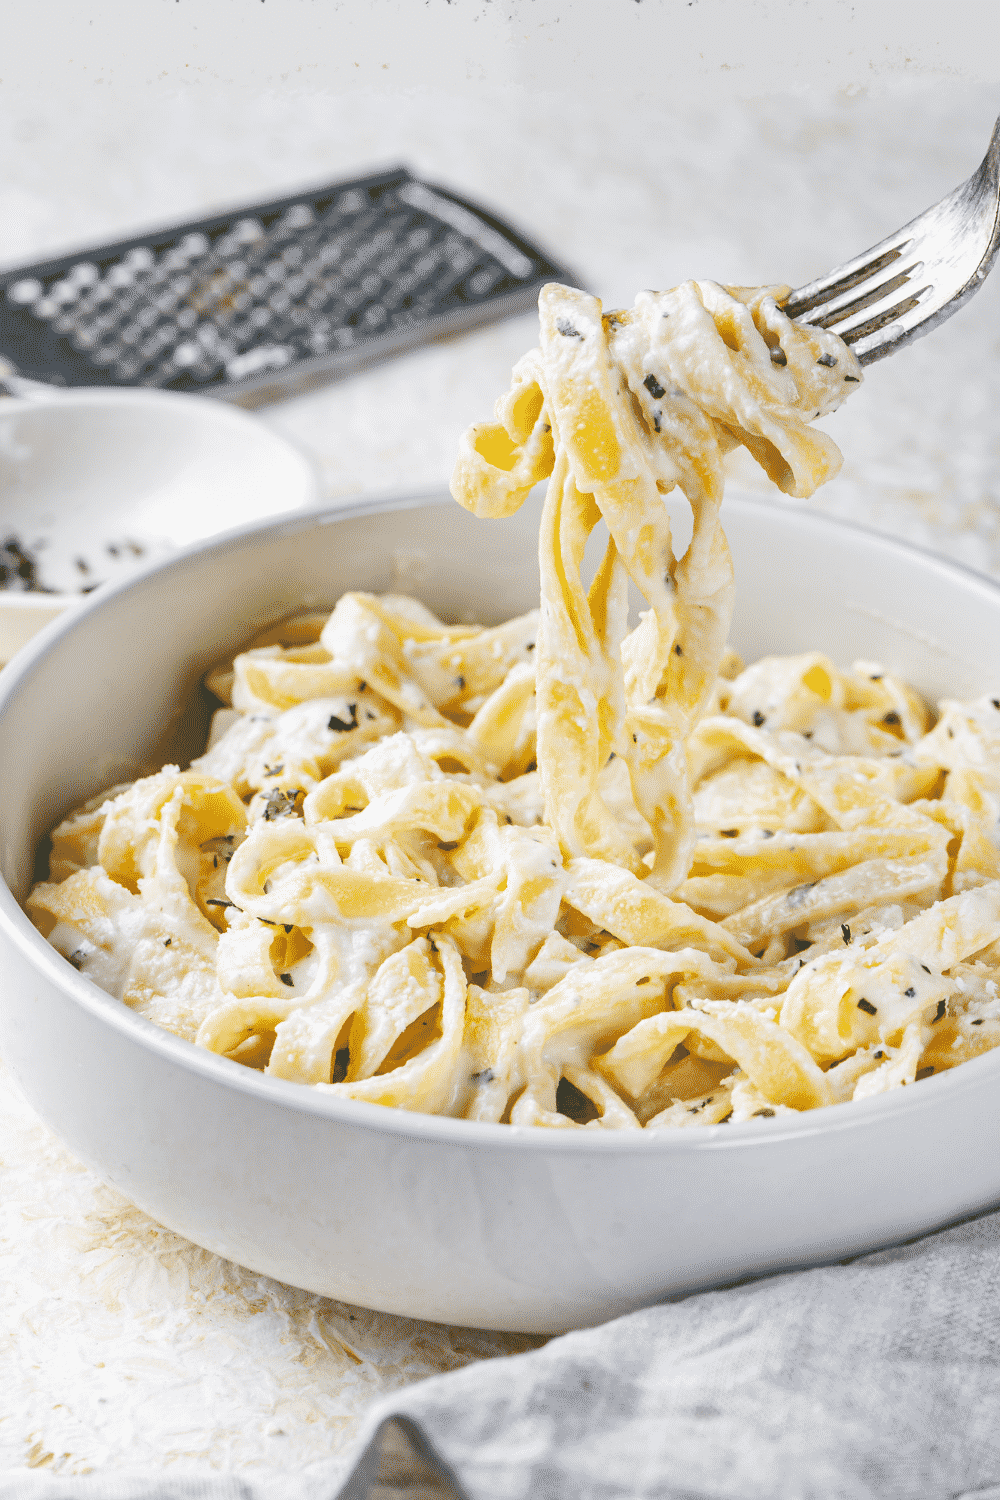 A white bowl filled with fettuccine Alfredo. A fork is hovering over the ball and has fettuccine noodles in the prongs and touching the rest of the noodles in the bowl.